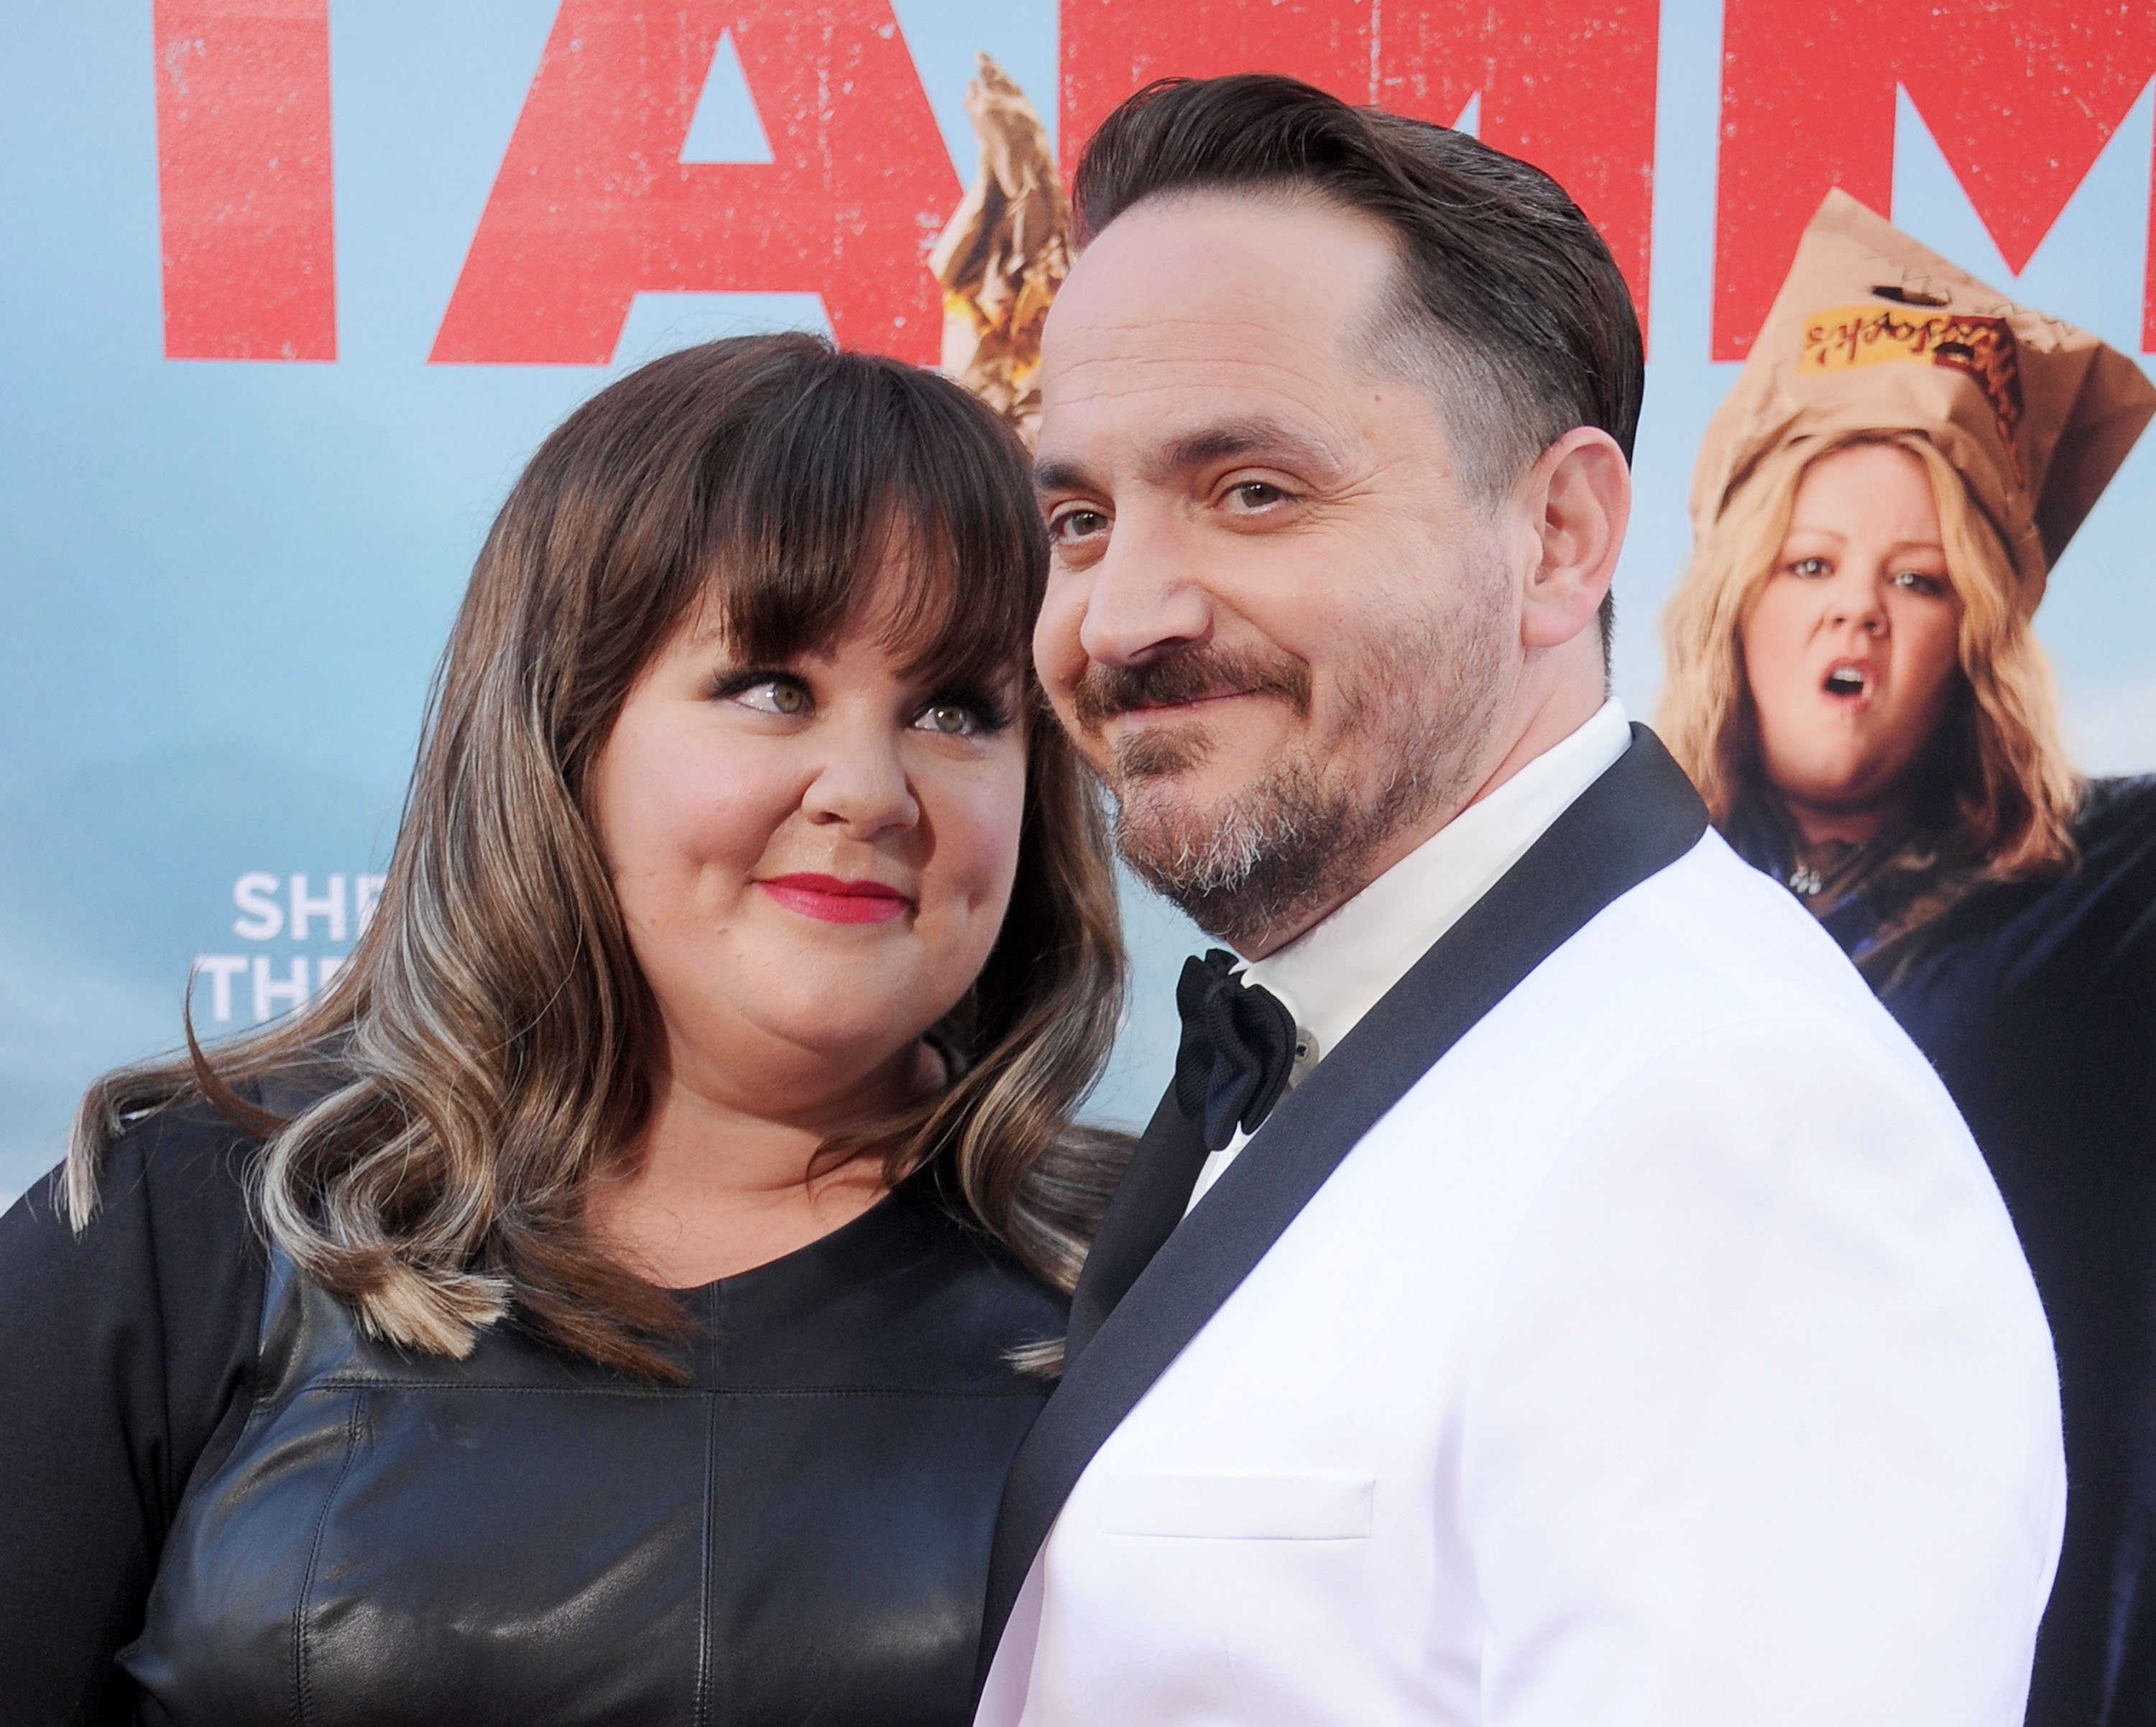 Melissa McCarthy and husband Ben Falcone arrive at the premiere of "Tammy" at TCL Chinese Theatre on June 30, 2014 in Hollywood, California. / Source: Getty Images